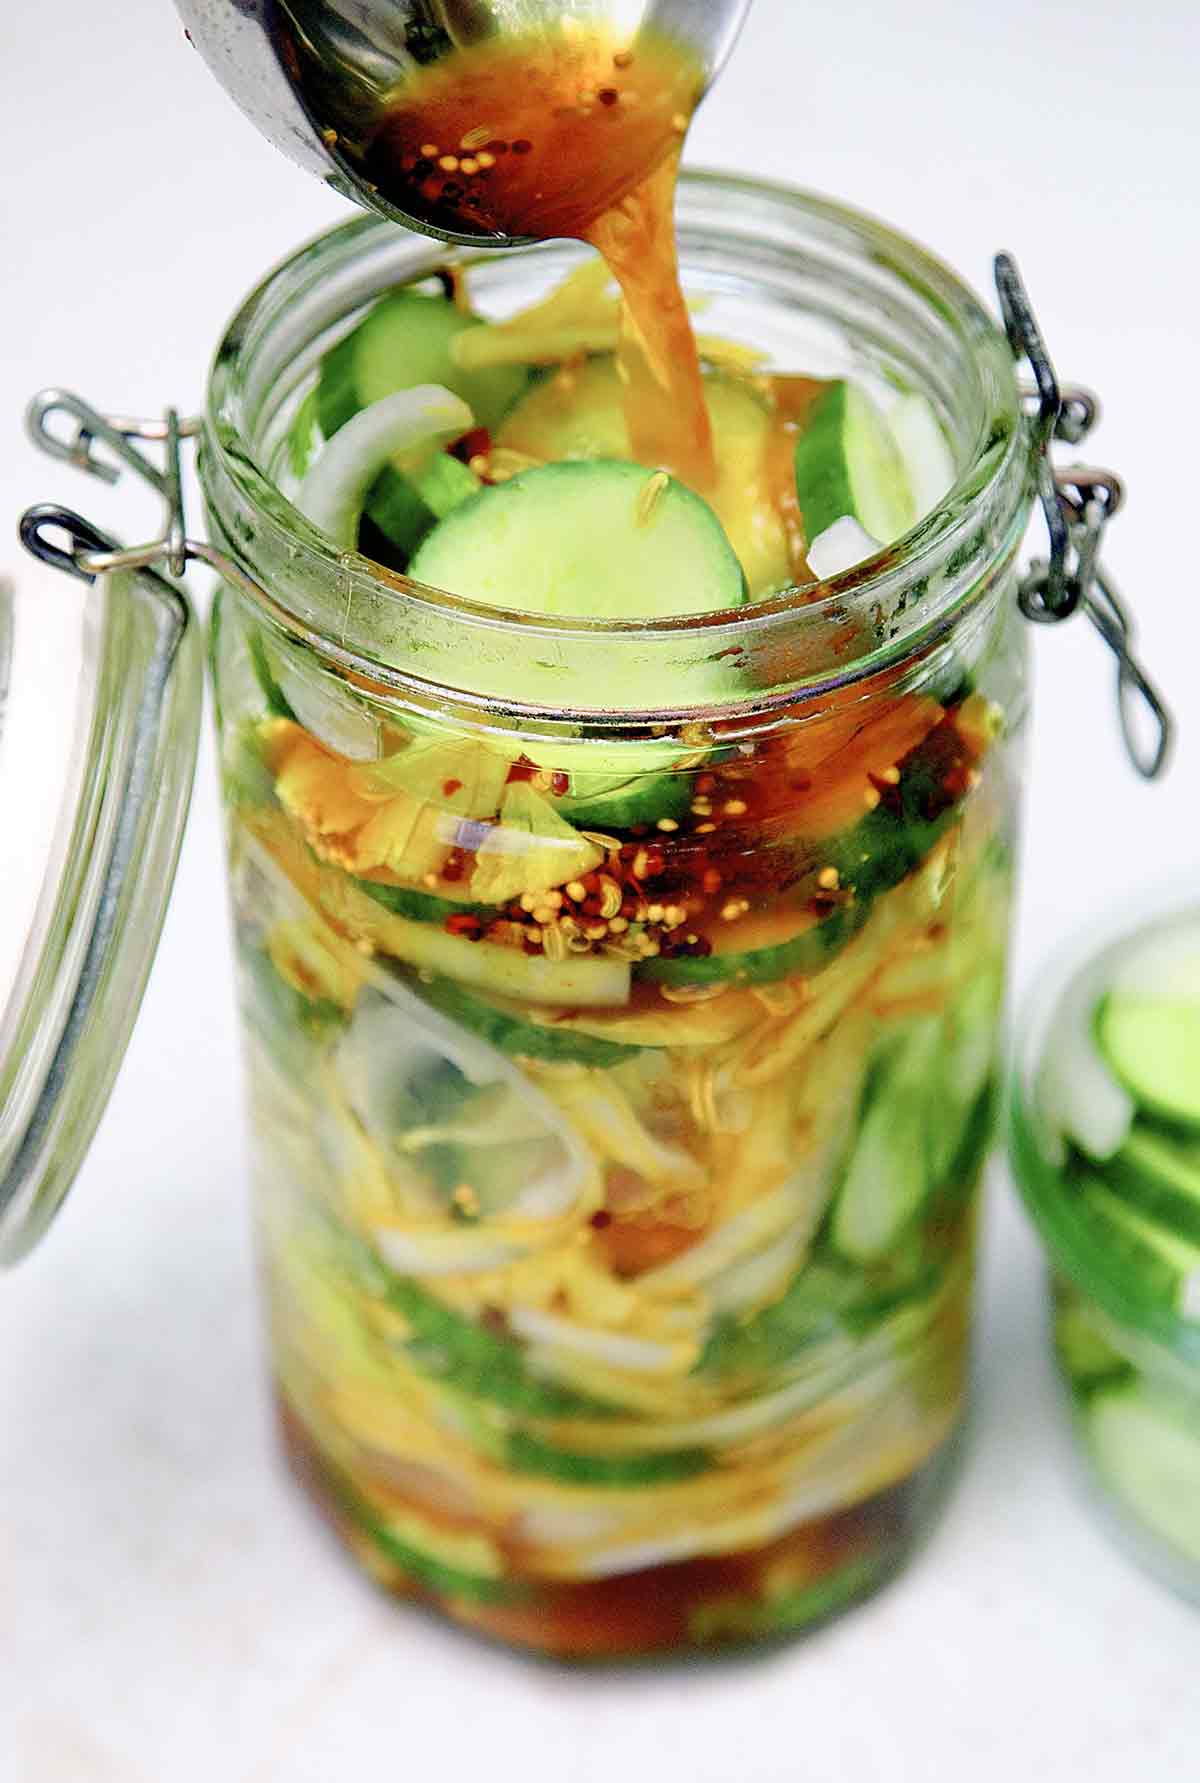 A glass canning jar filled with bread and butter pickles, with pickling liquid being poured over.